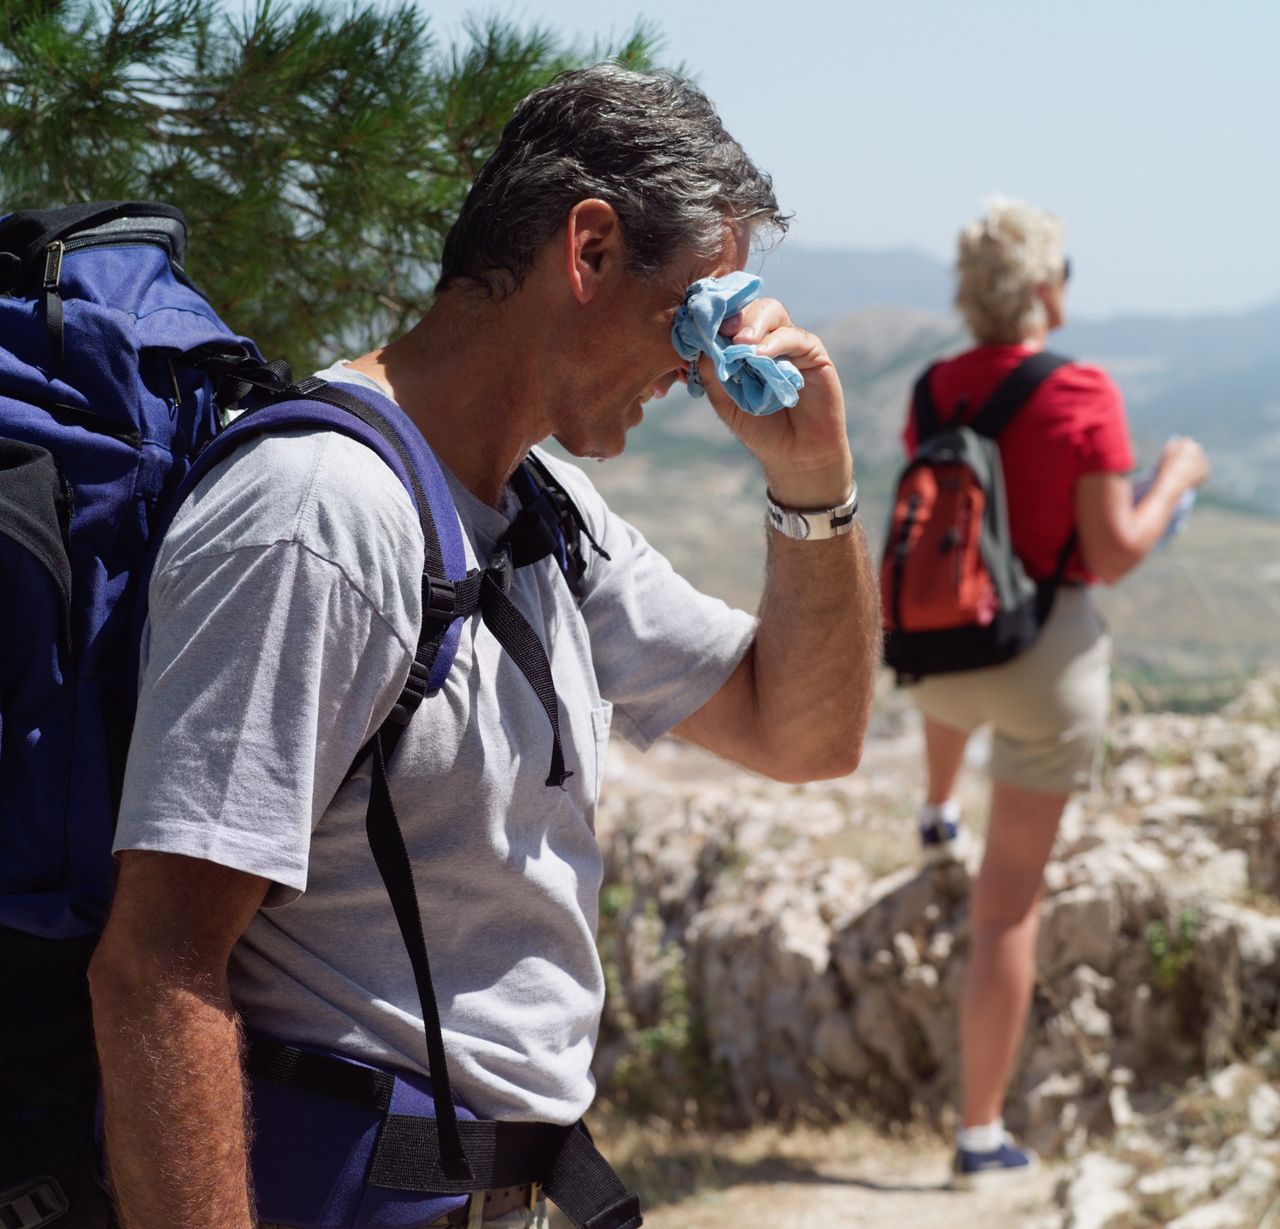 Heatwave havoc in Greece: Tourists disappear on solo hikes